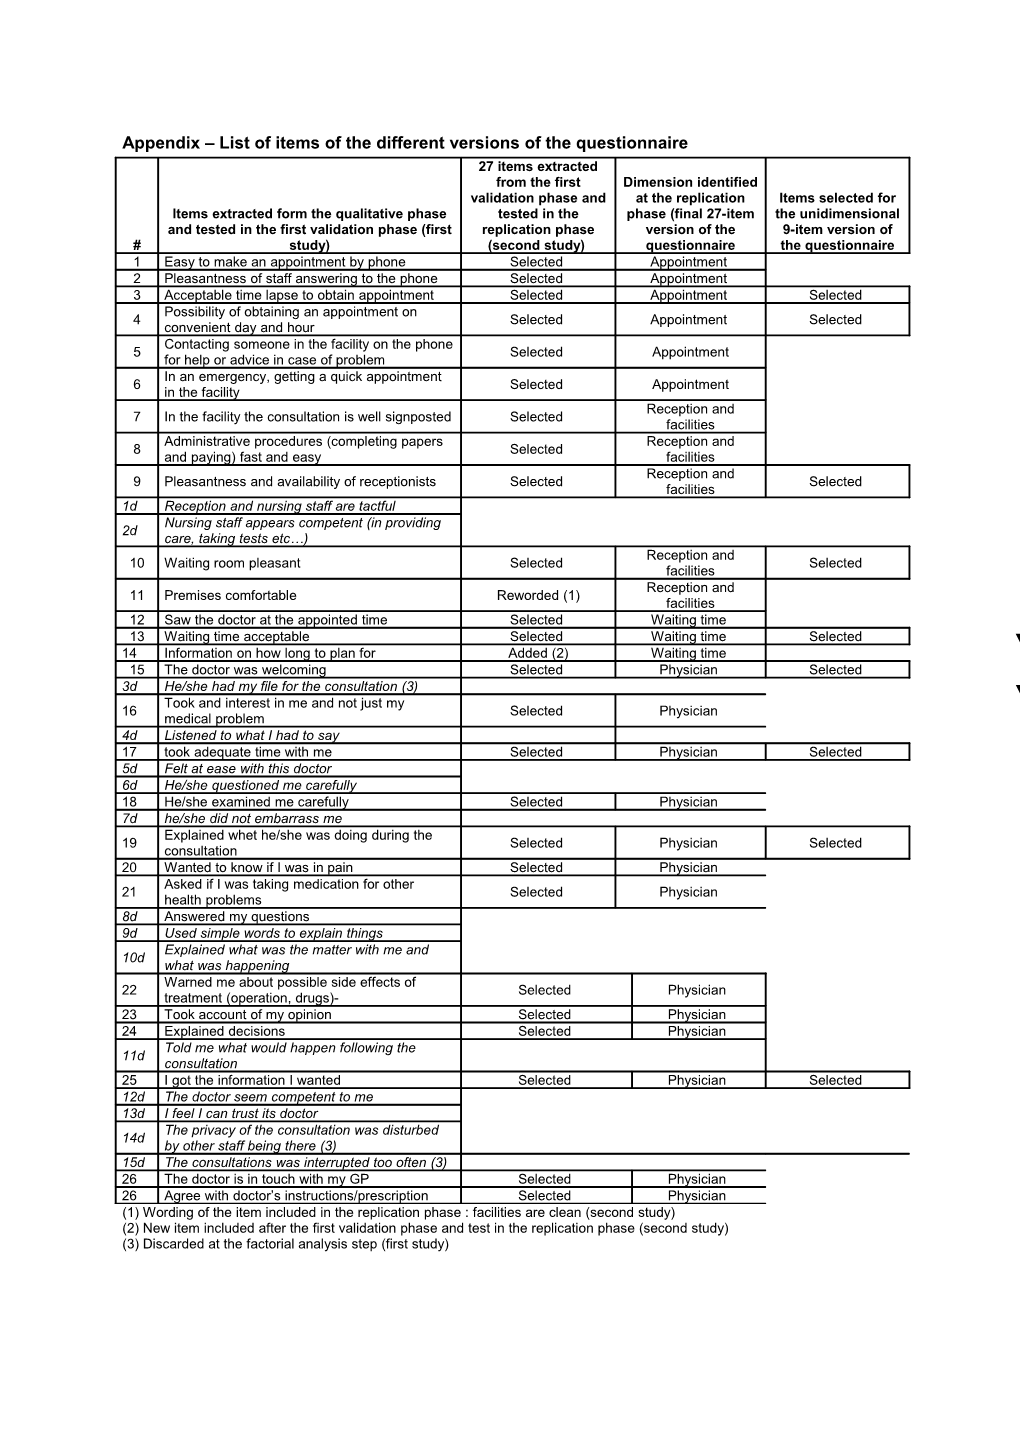 Annex List of Items Selected in the Different Versions of the Questionnaire